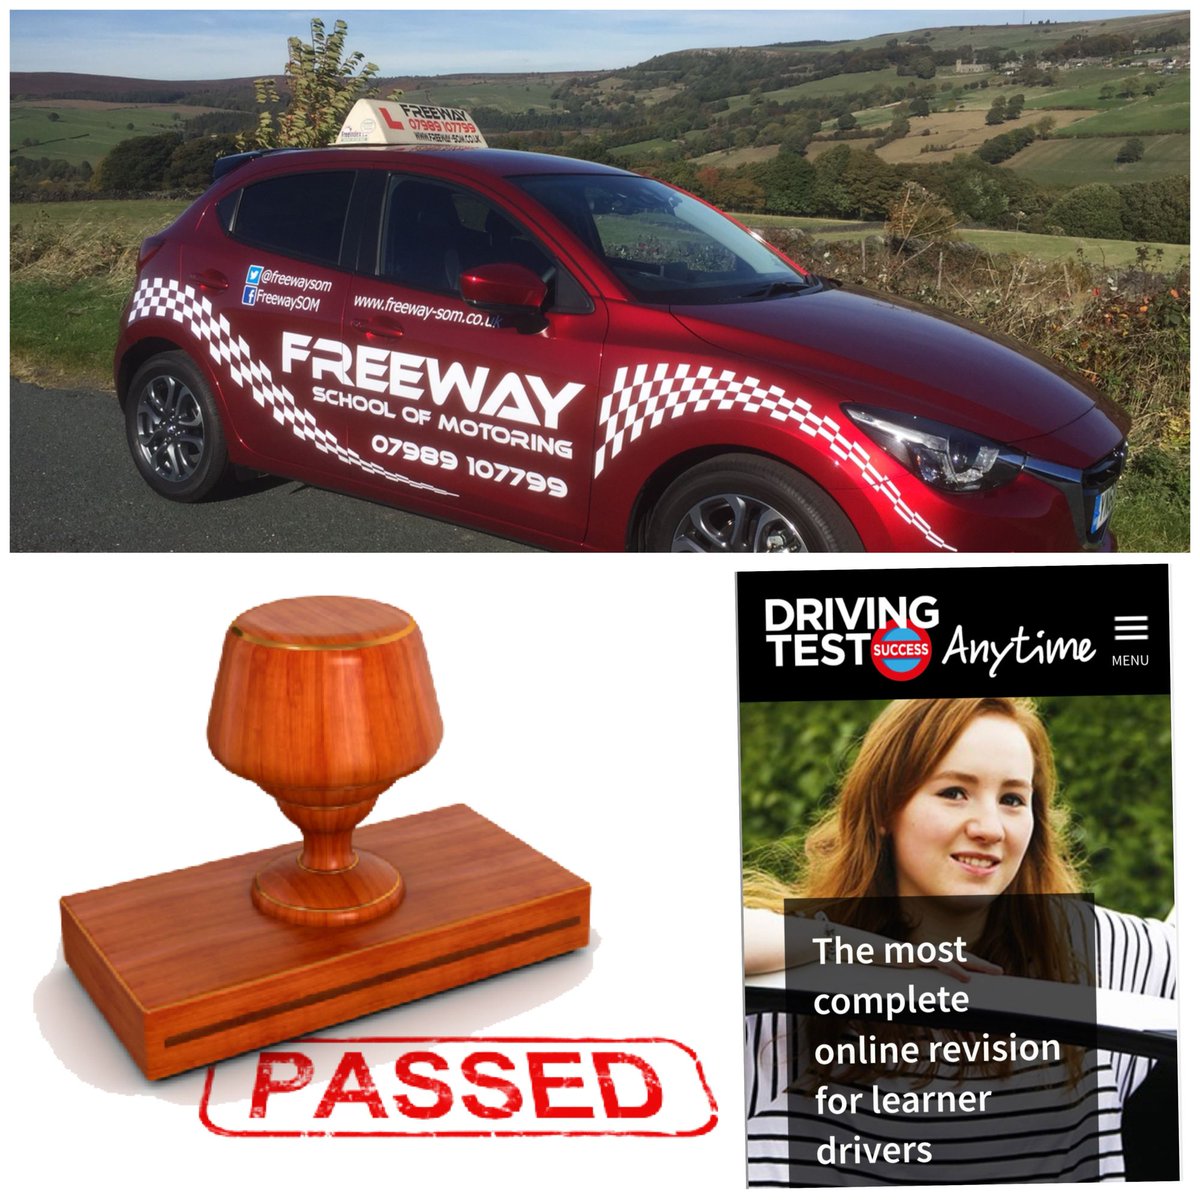 Congratulations to Amelia who passed her theory test today with some excellent scoring on both parts of the test. Well done Amelia, now to push on for a similar result with the practical part

#Barnsleyisbrill #drivinglessons #drivingtest